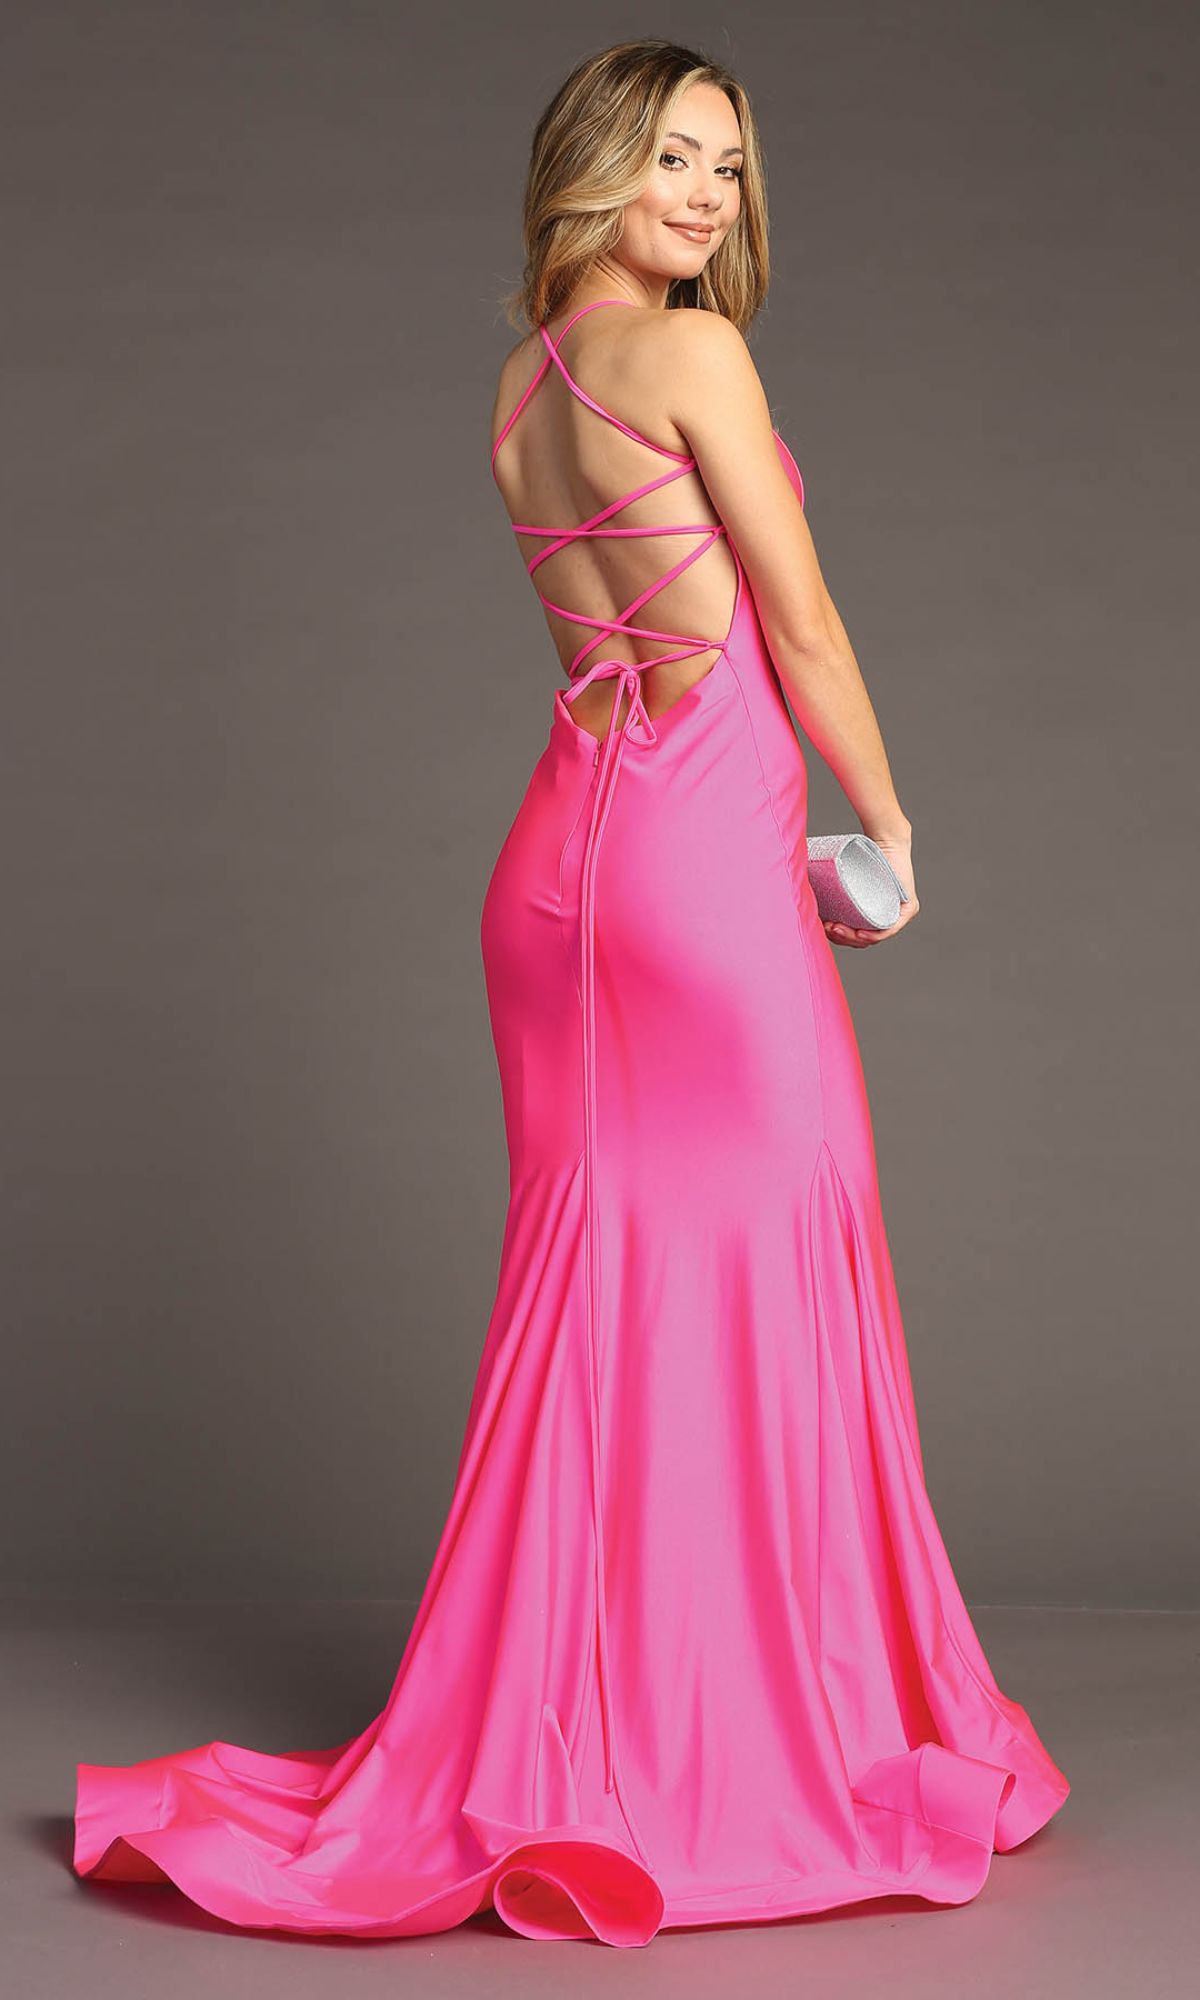 Long Prom Dress YG5024 by Chicas